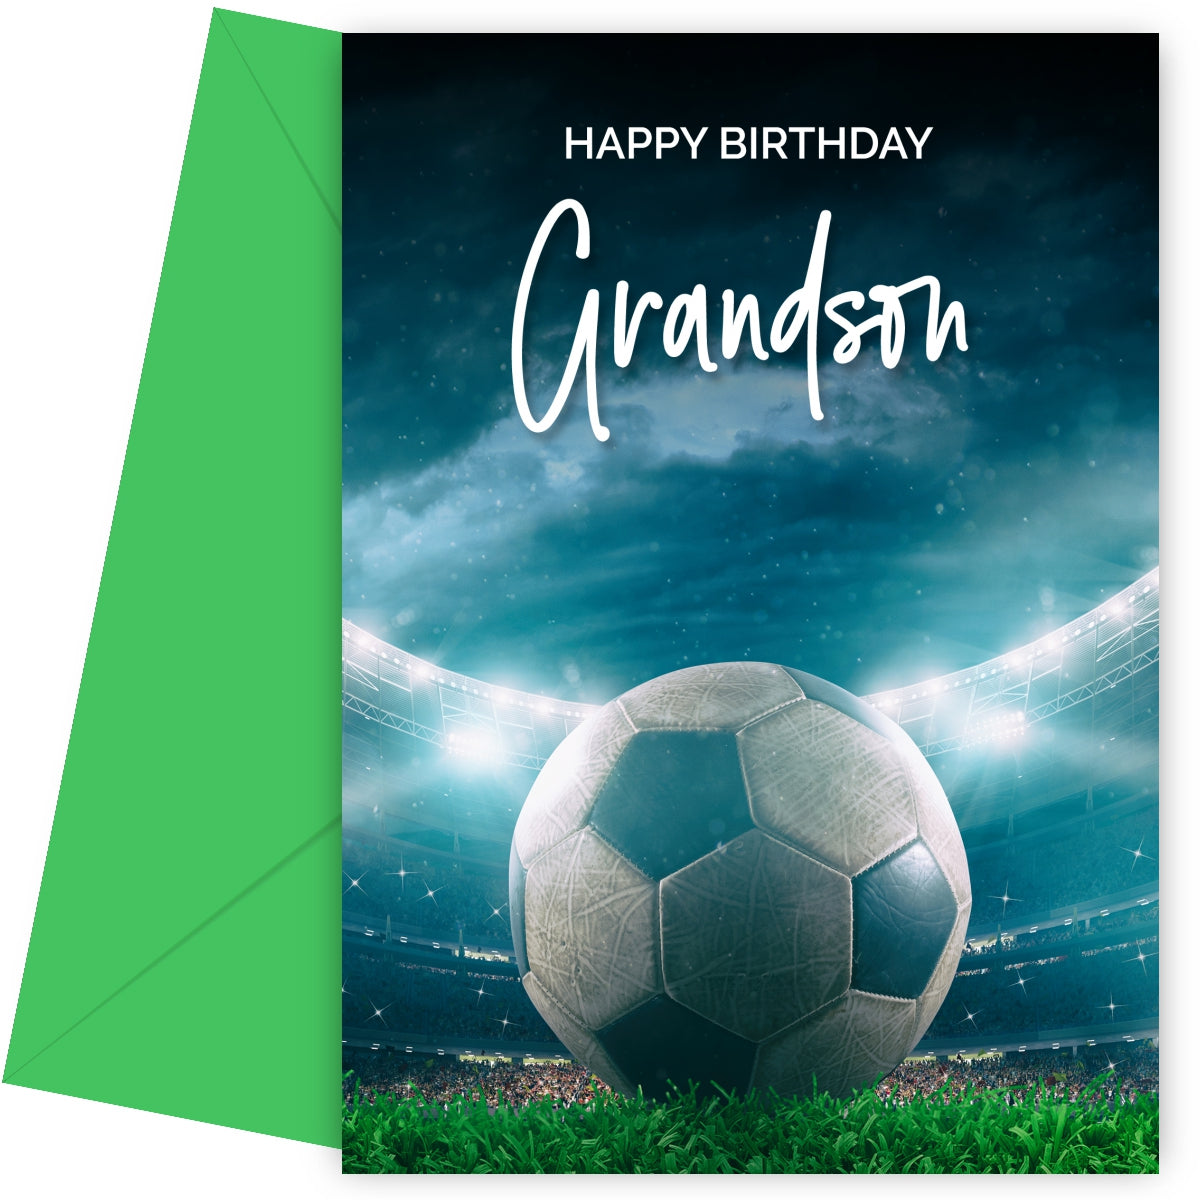 Football Birthday Cards for Grandson - Adult or Boy Birthday Cards - Any Age